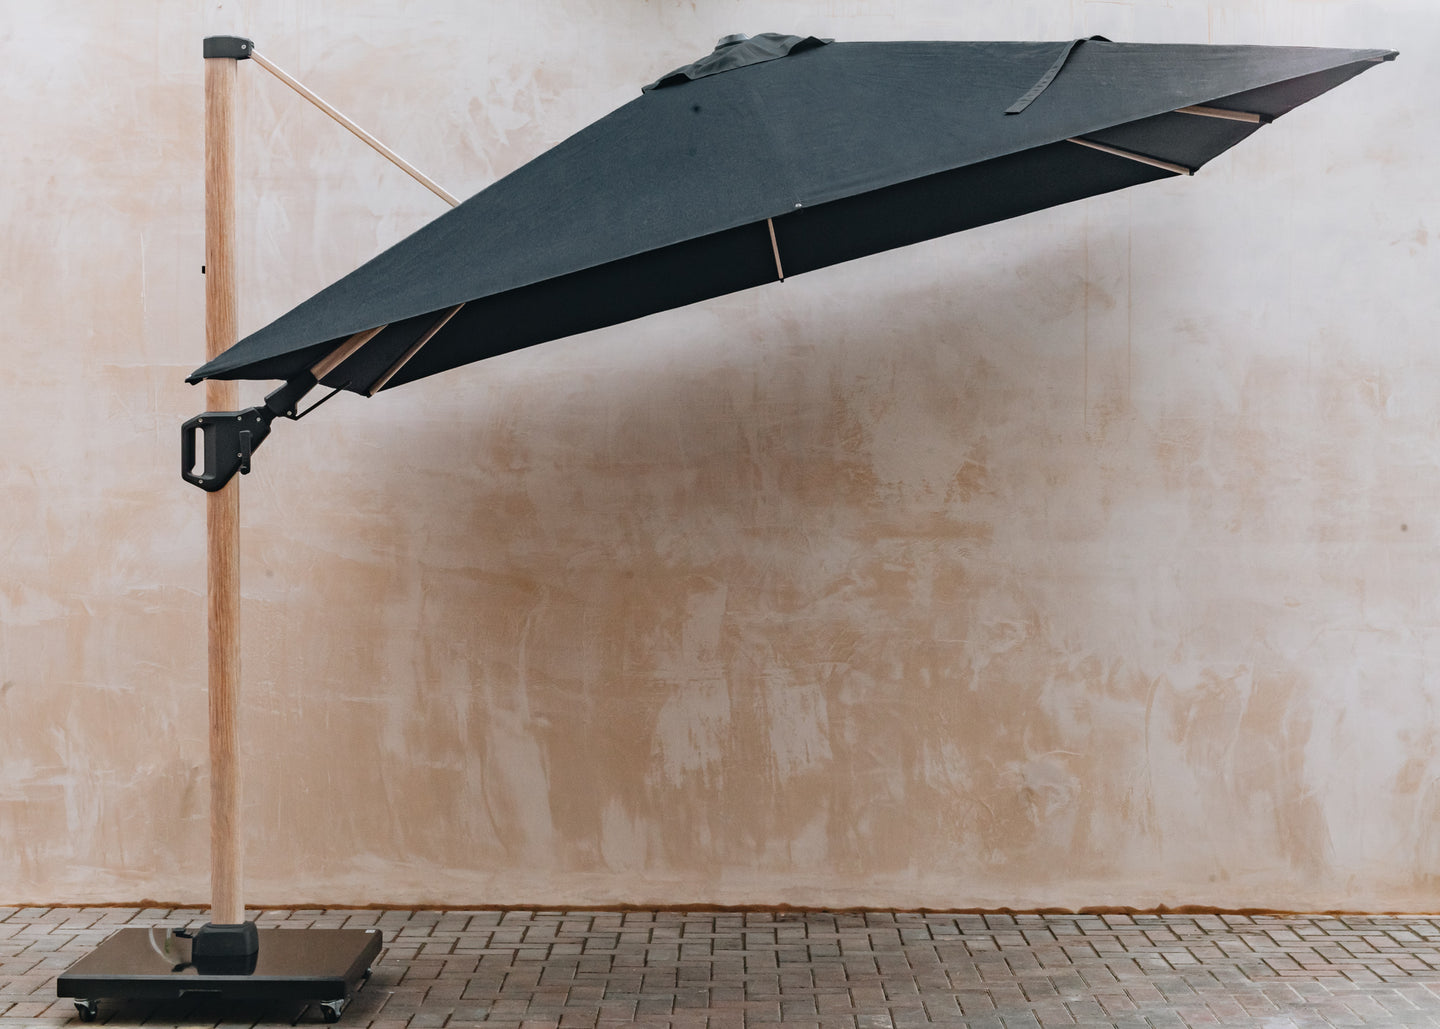 Oak Effect Challenger Square Free Arm Parasol in Faded Black (3mx3m)